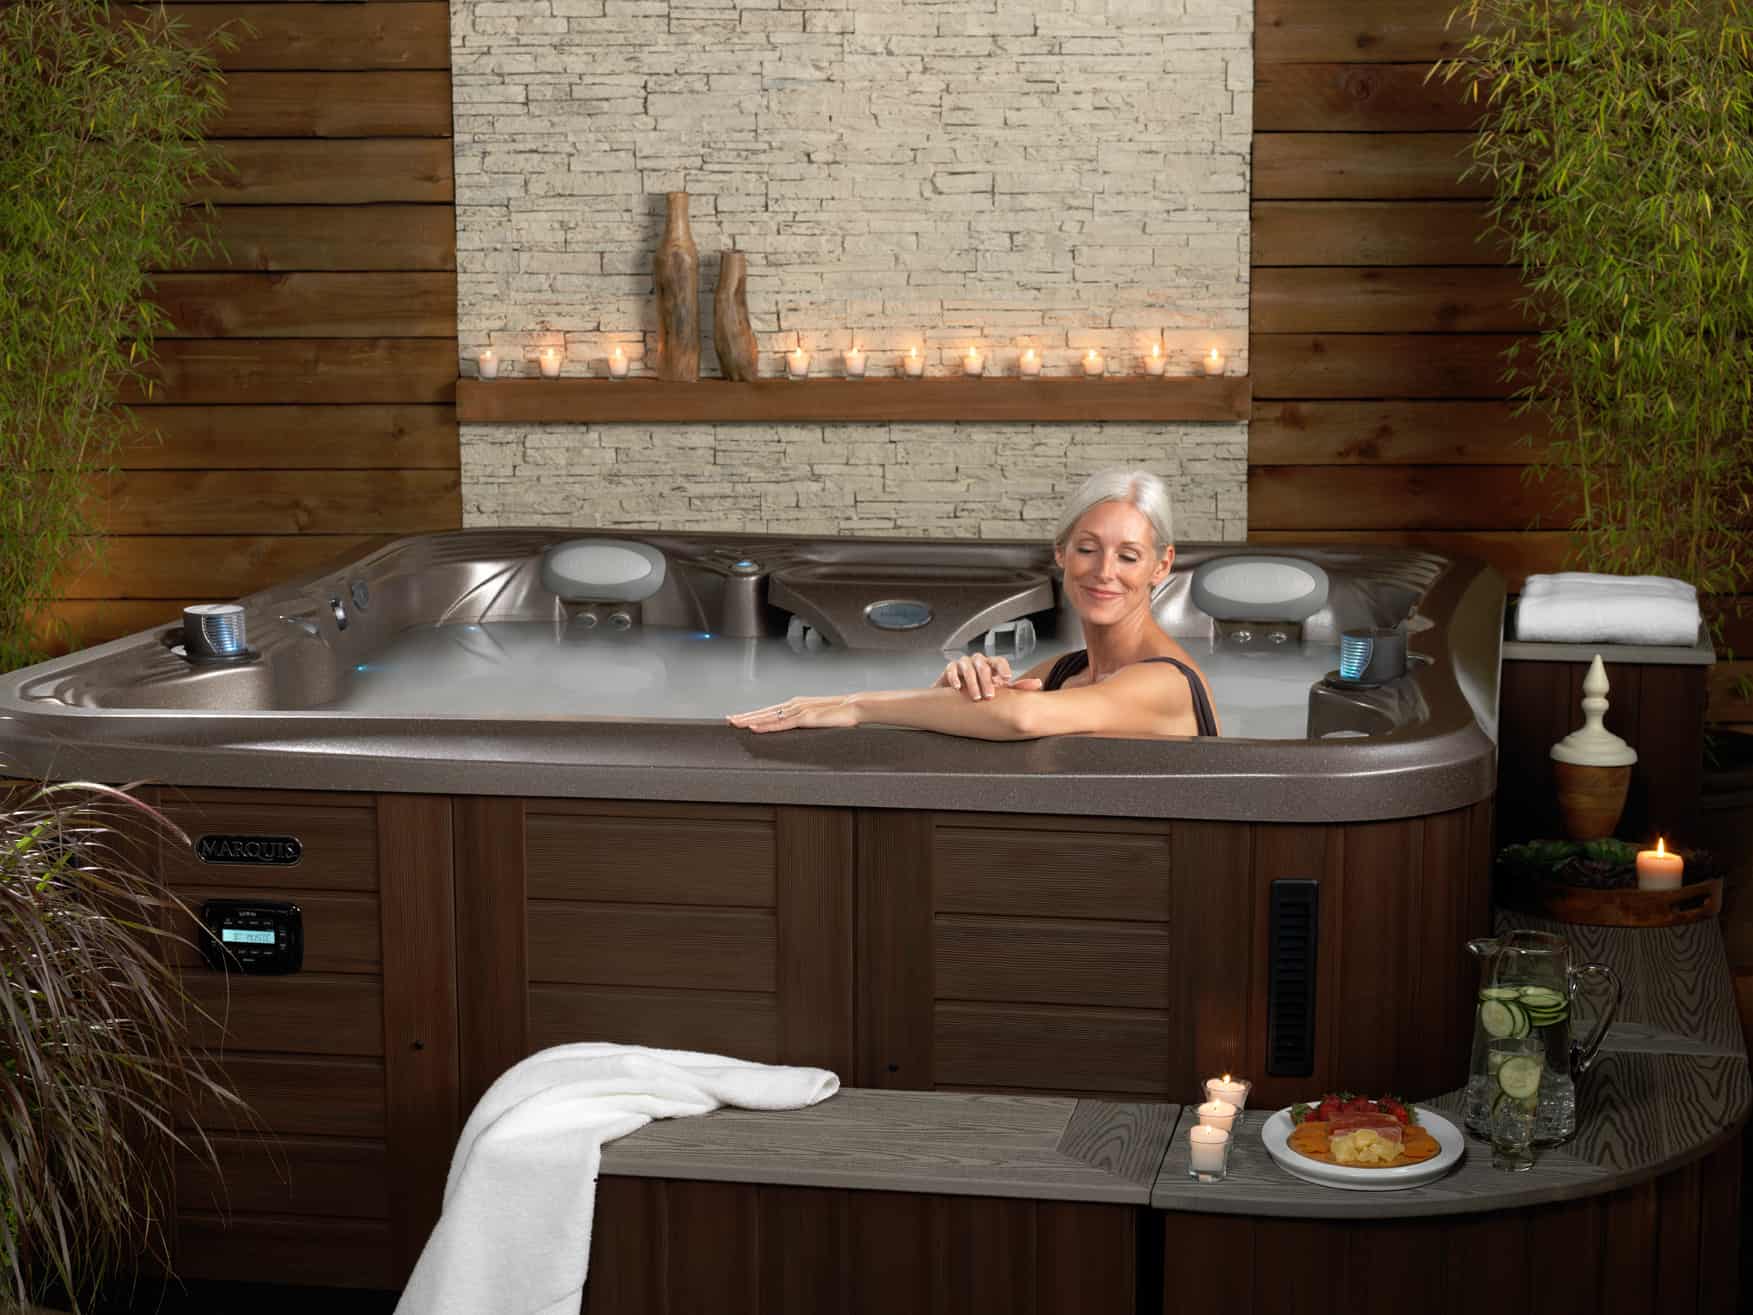 Pictured is a woman in her at-home spa. She is sitting in a hot tub, her arm is along the edge of the tub and she is smiling at the camera. The hot tub appears to be in an enclosed patio and there is a stone backdrop with small candles. There is a bench in front of the tub with a towel, cucumber water, and a plate of food.